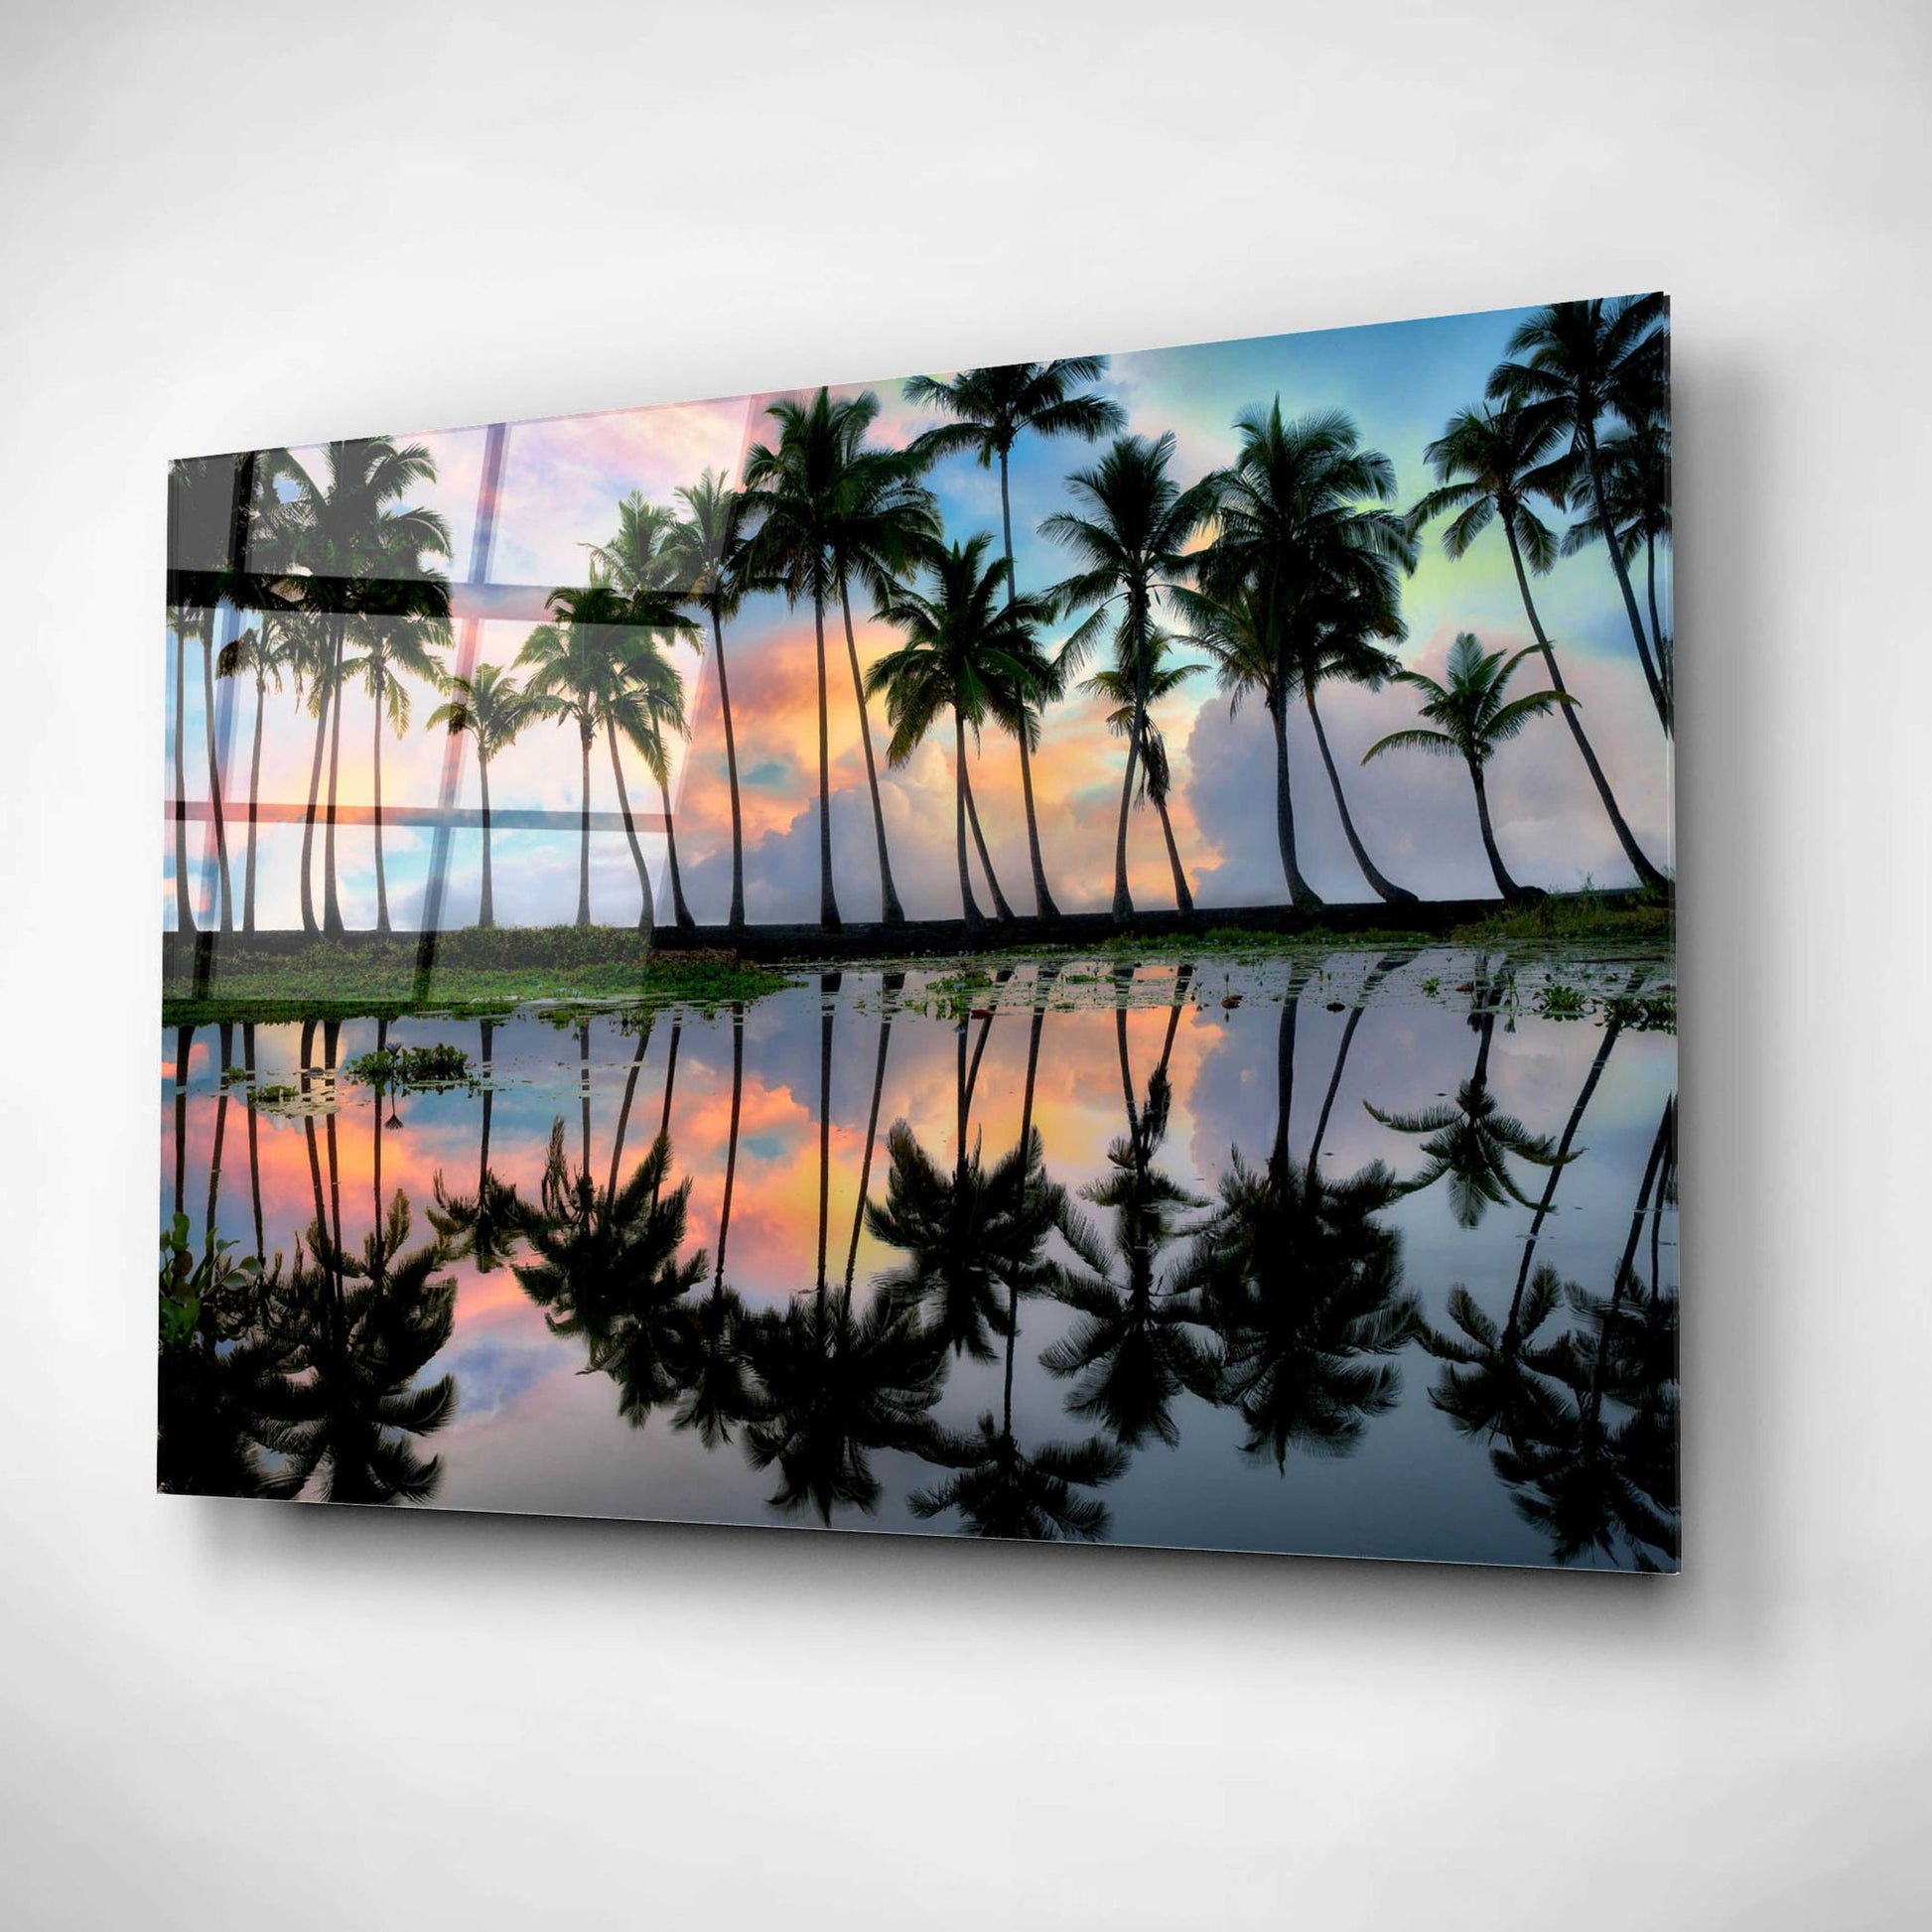 Epic Art 'Palm Reflections' by Dennis Frates, Acrylic Glass Wall Art,16x12